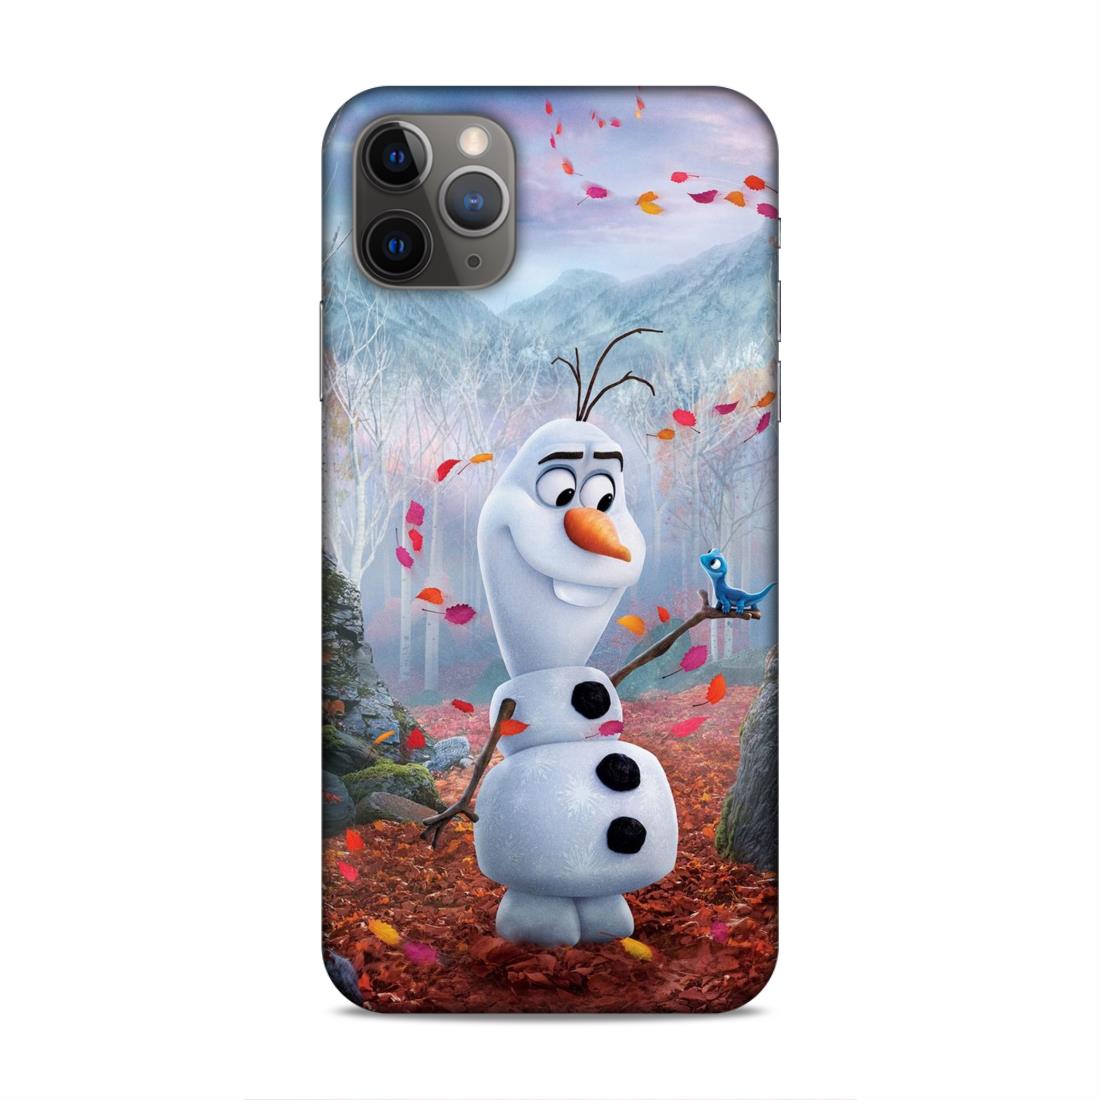 Olaf Hard Back Case For Apple iPhone 11 Pro Max